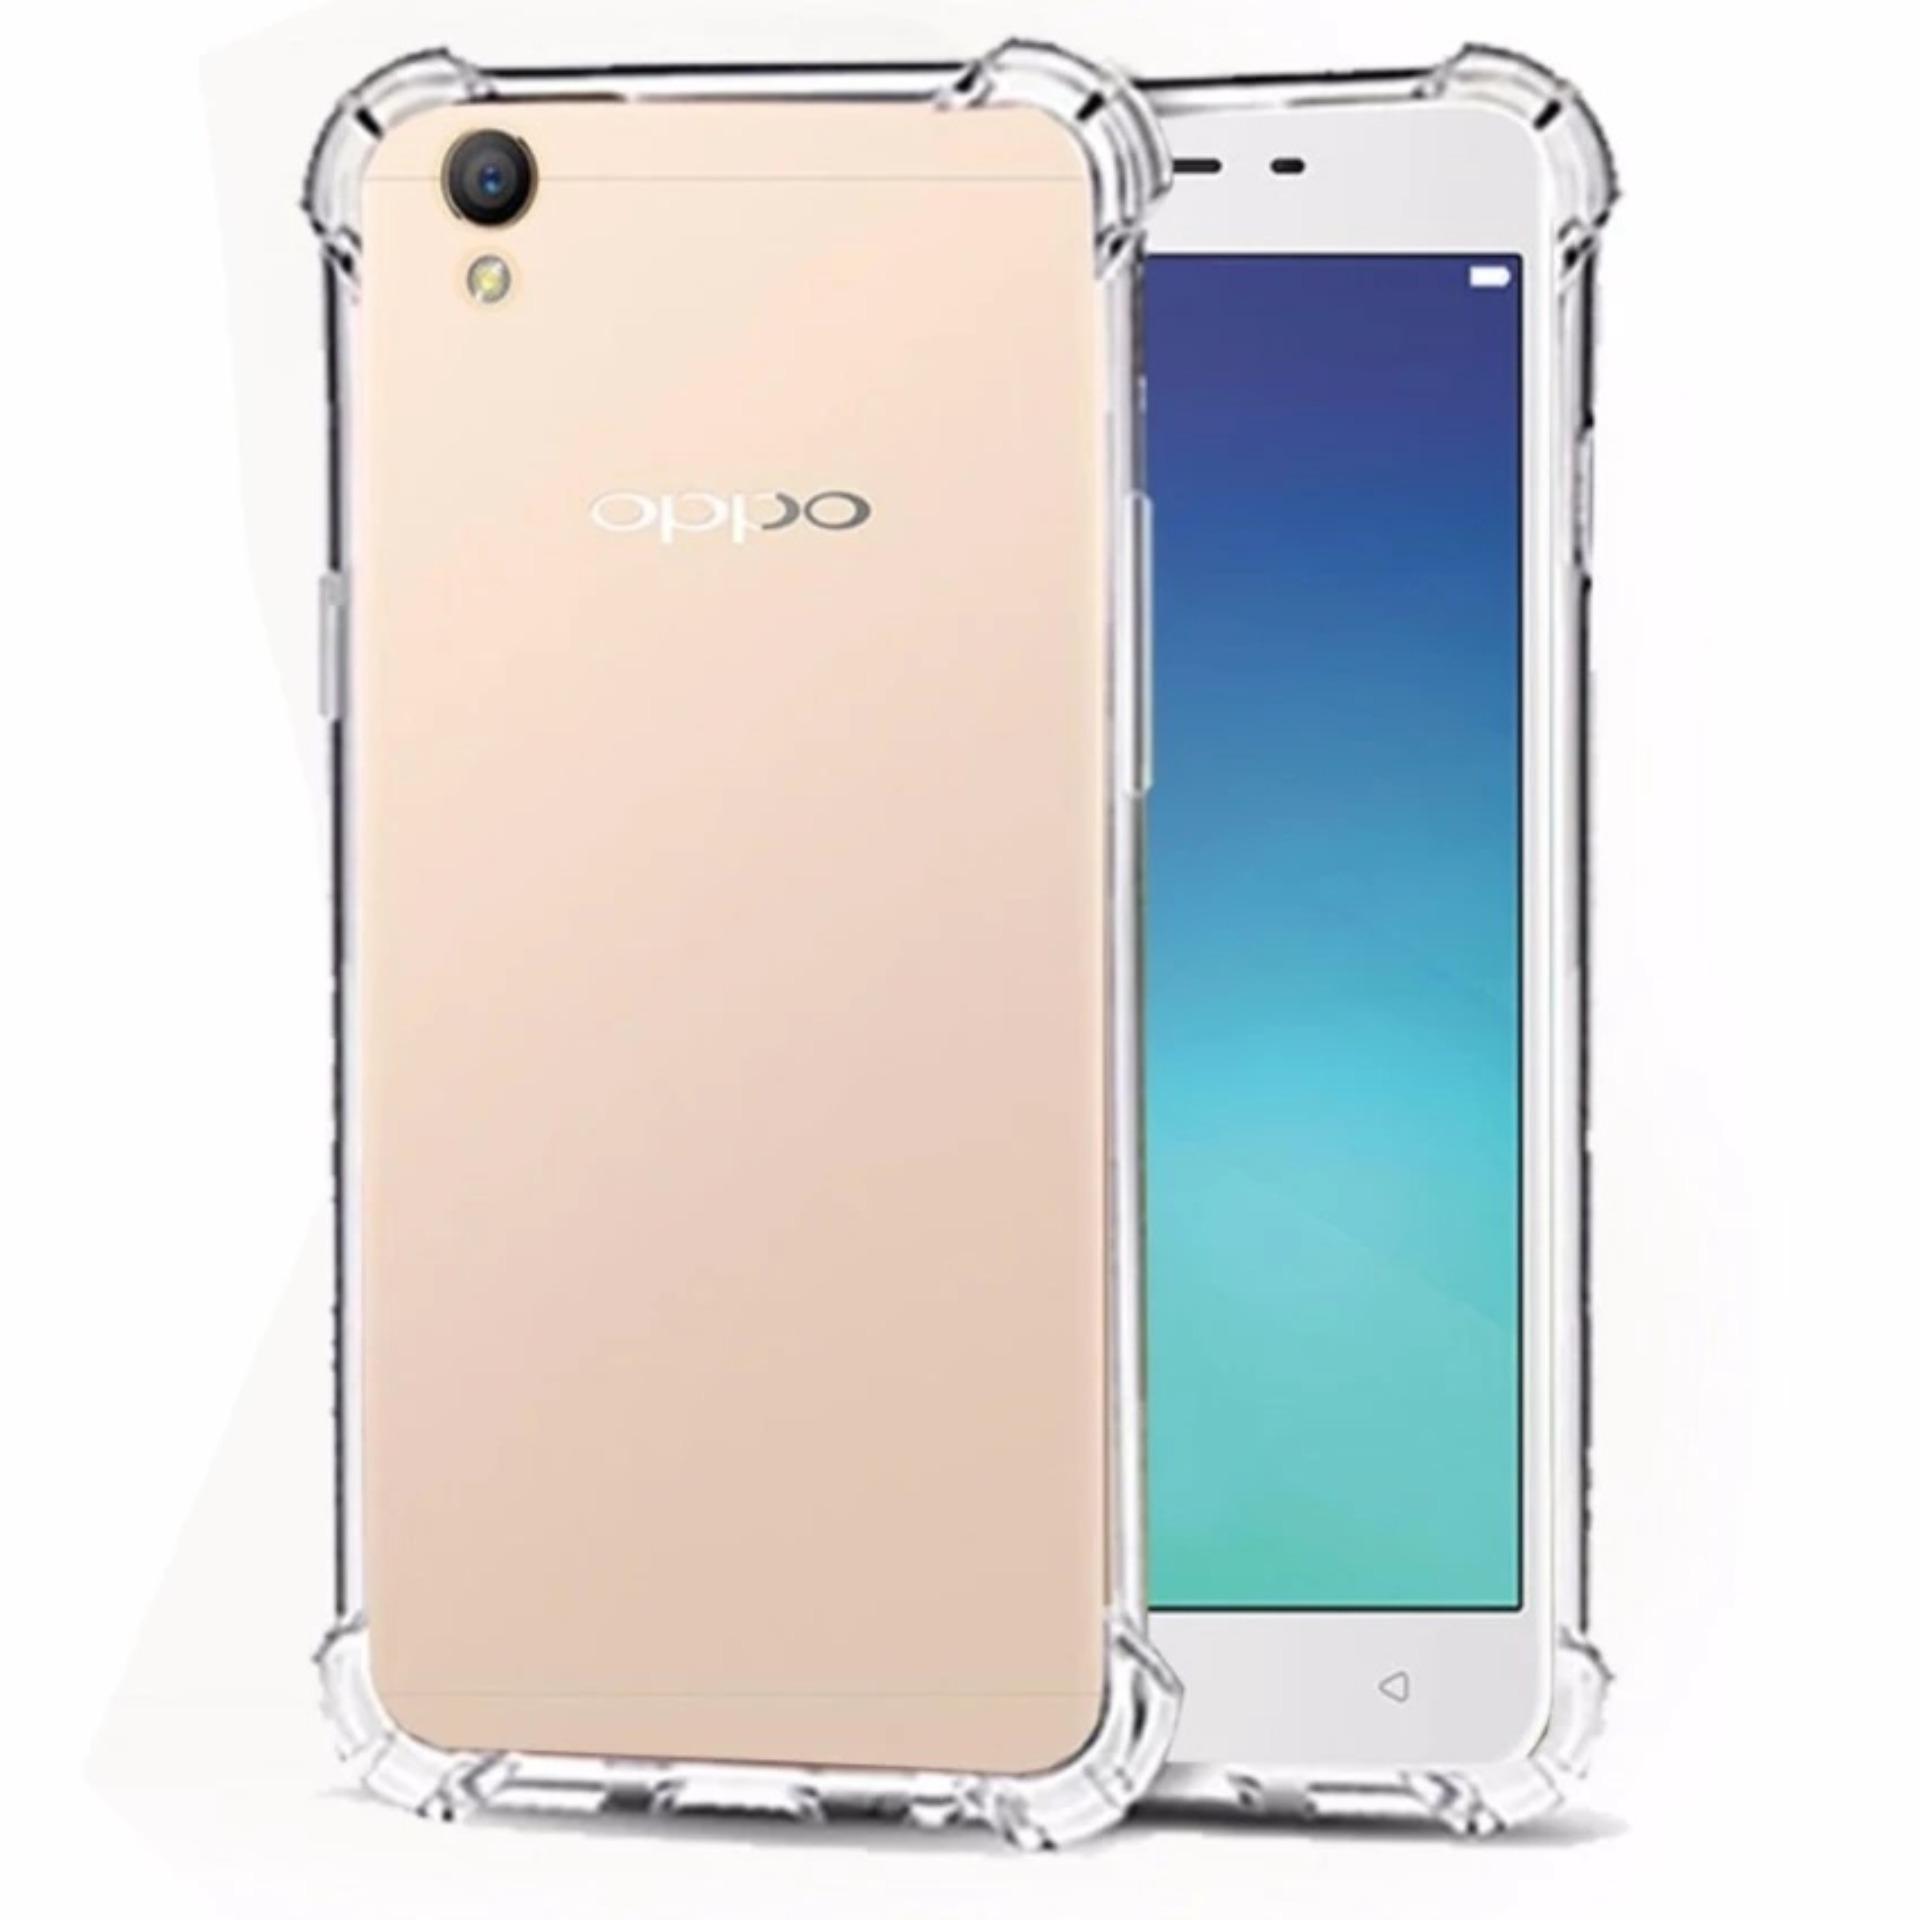 MR Soft Case Anti Crack Oppo A37 Anti Crack Neo 9 Anti Shock Case Oppo A37 / Ultrathin / Casing Oppo A37  / Silicone / Silikon Oppo Neo 9 Hp / - Clear